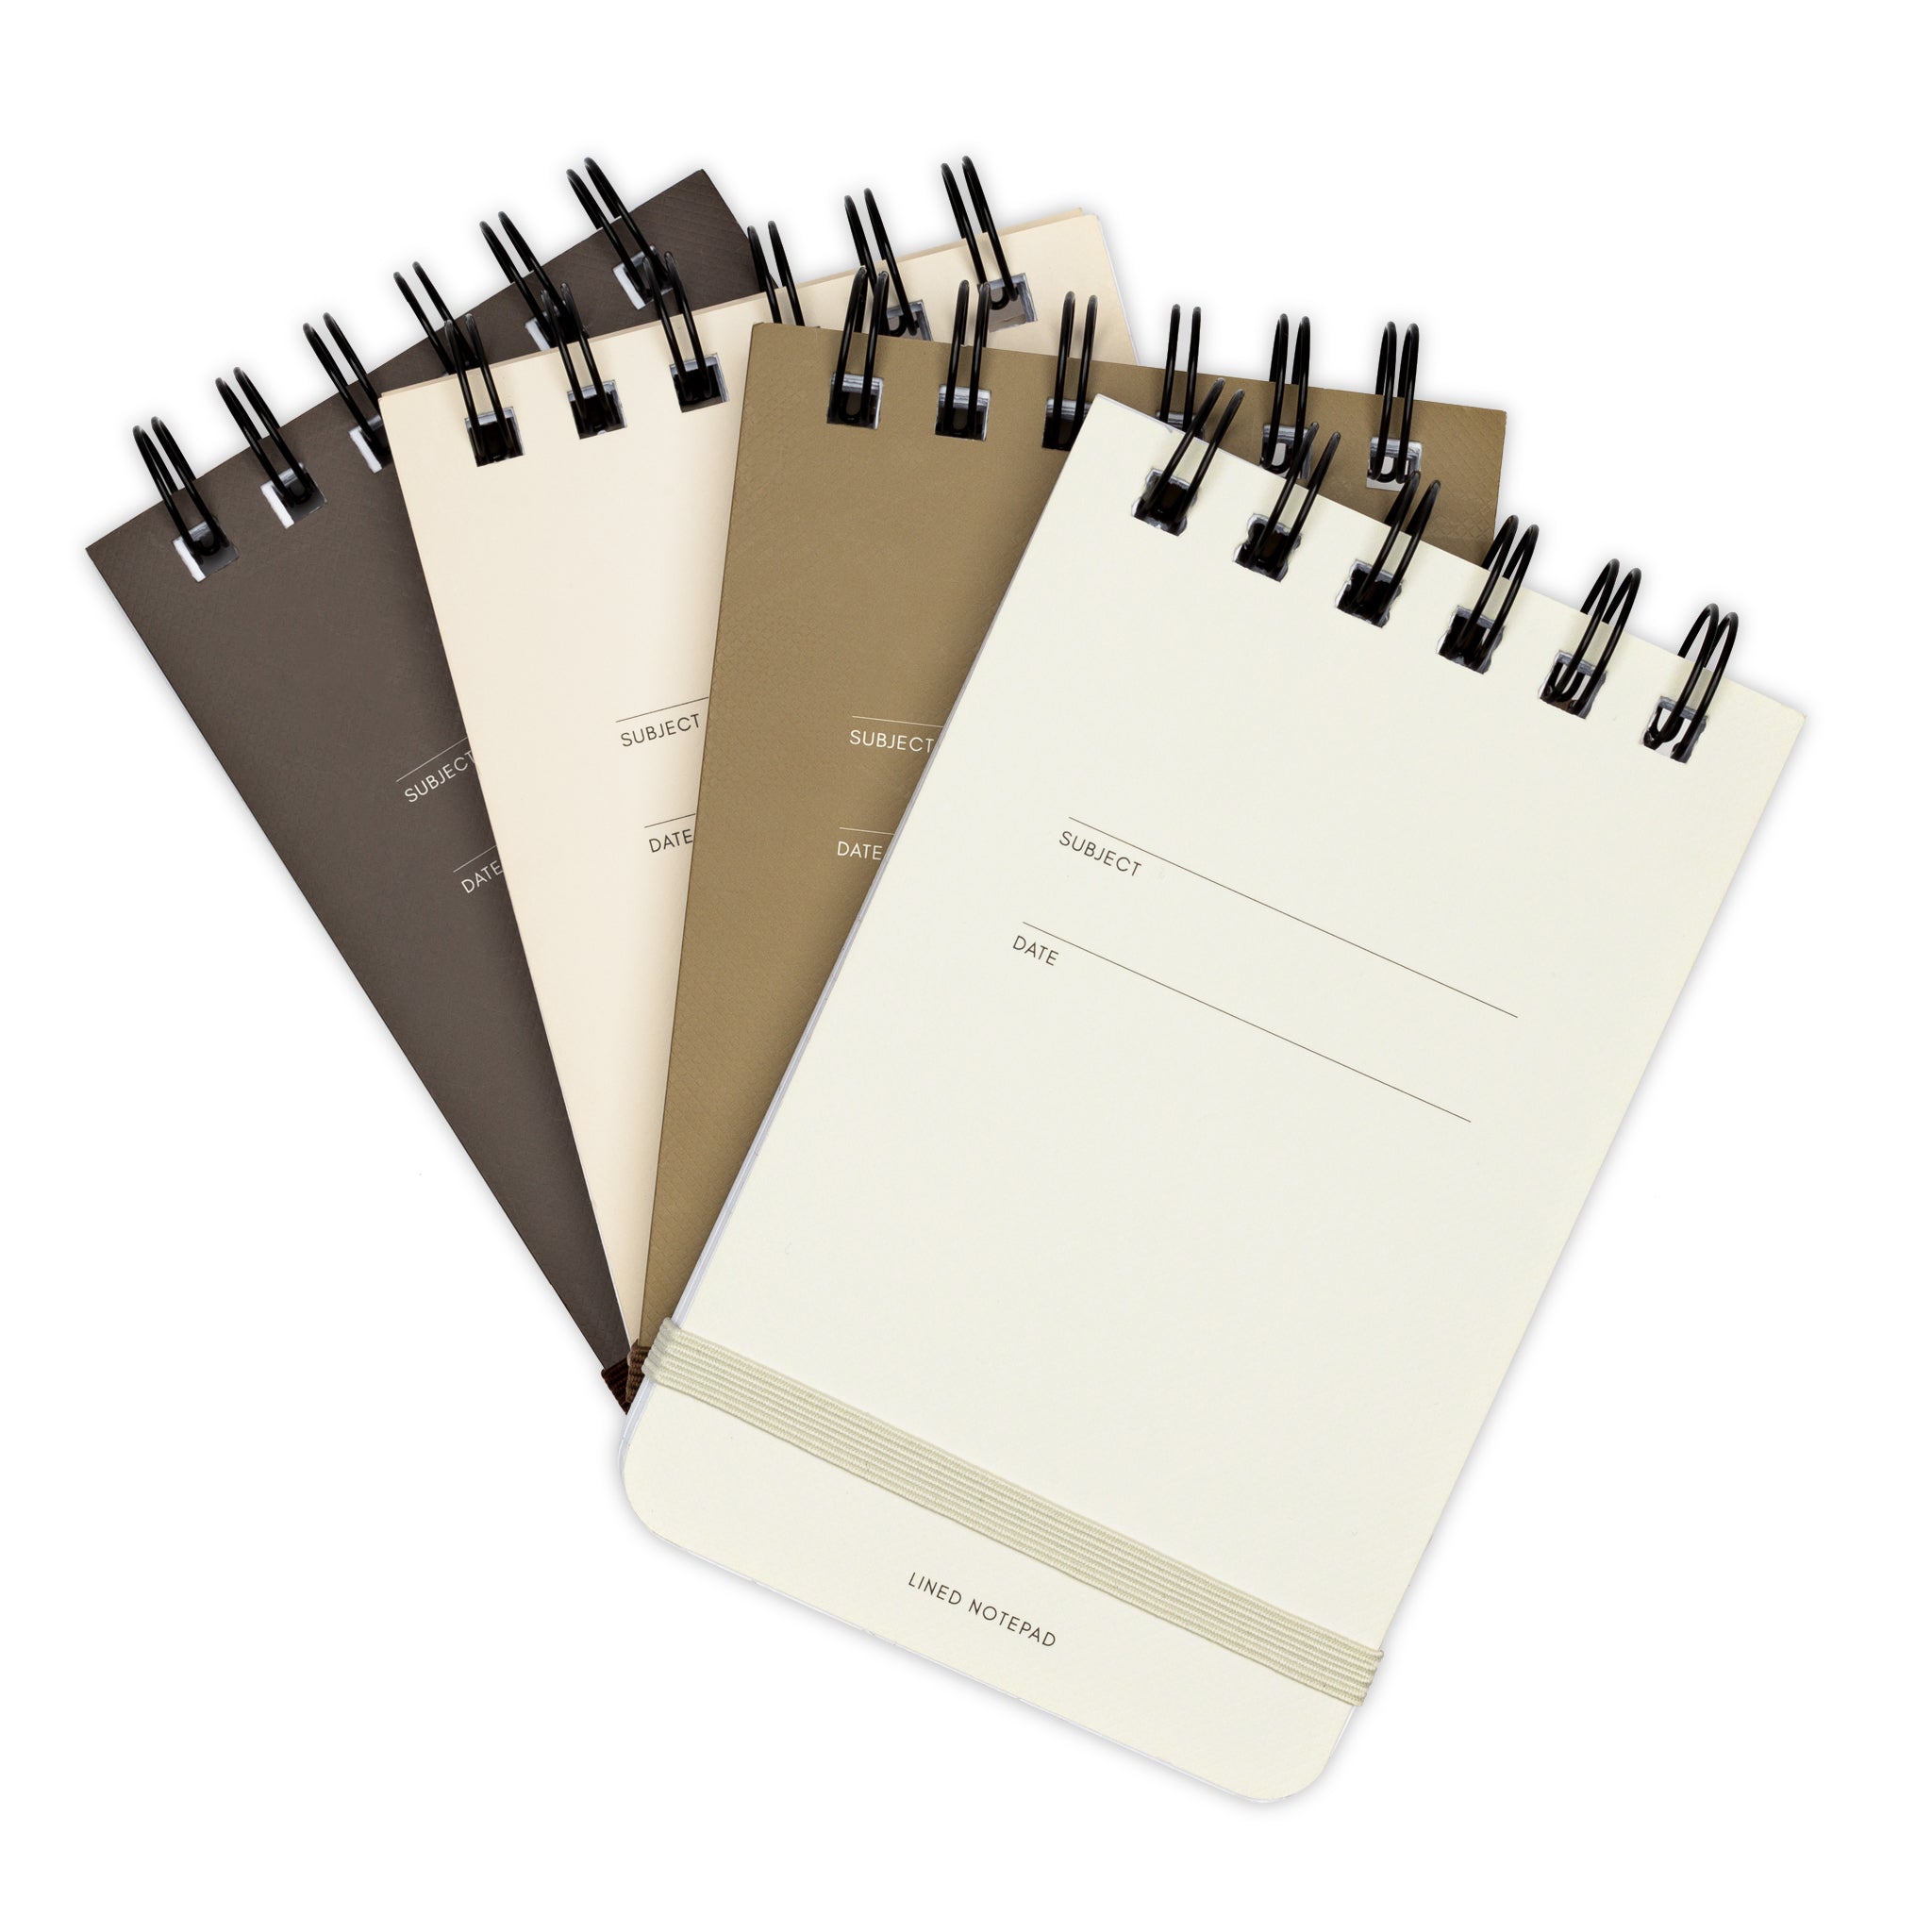 Lined & Blank Notebook Hardcover L 7colors / Spiral Notebook 